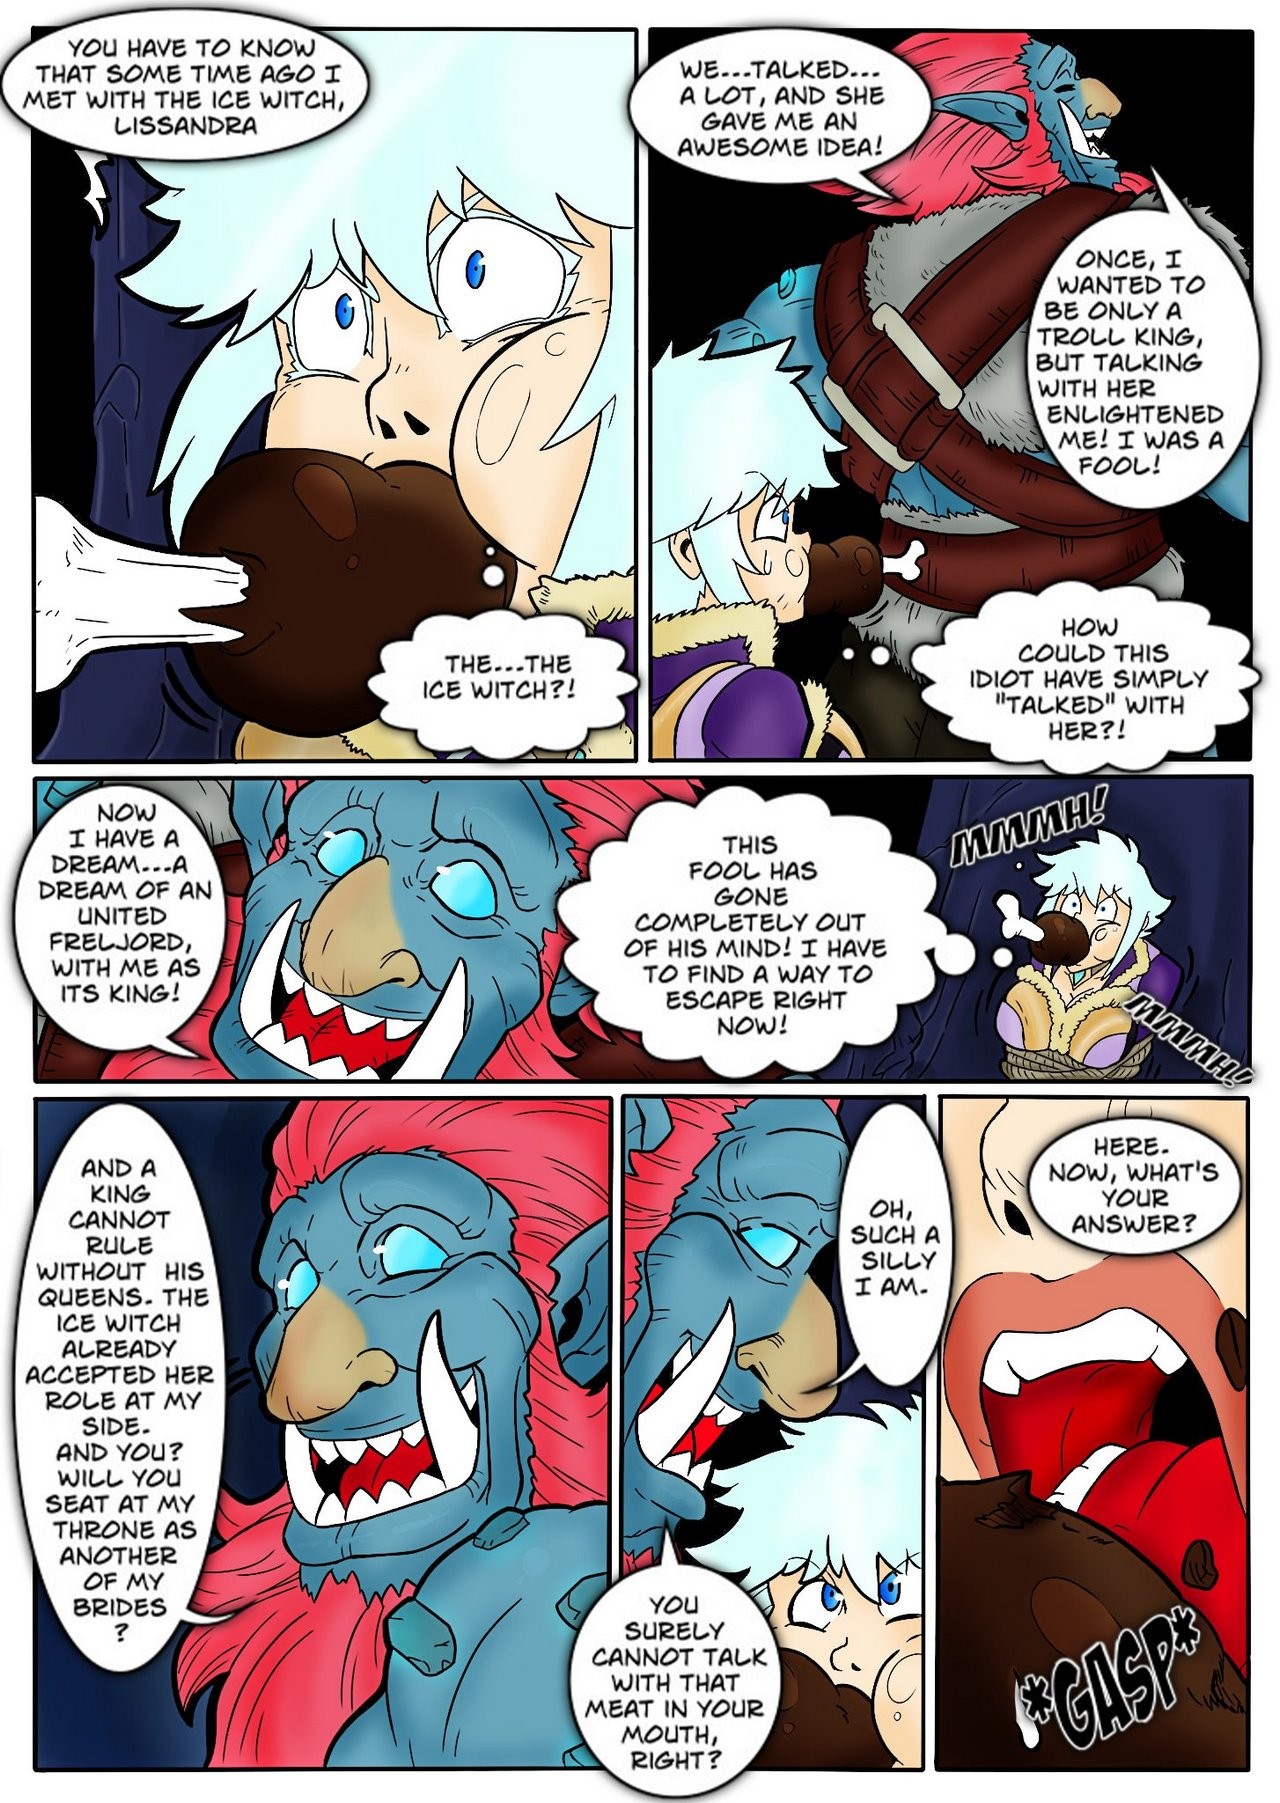 Tales of the Troll King ch. 1 - 3 ] [Colorized] porn comic picture 23